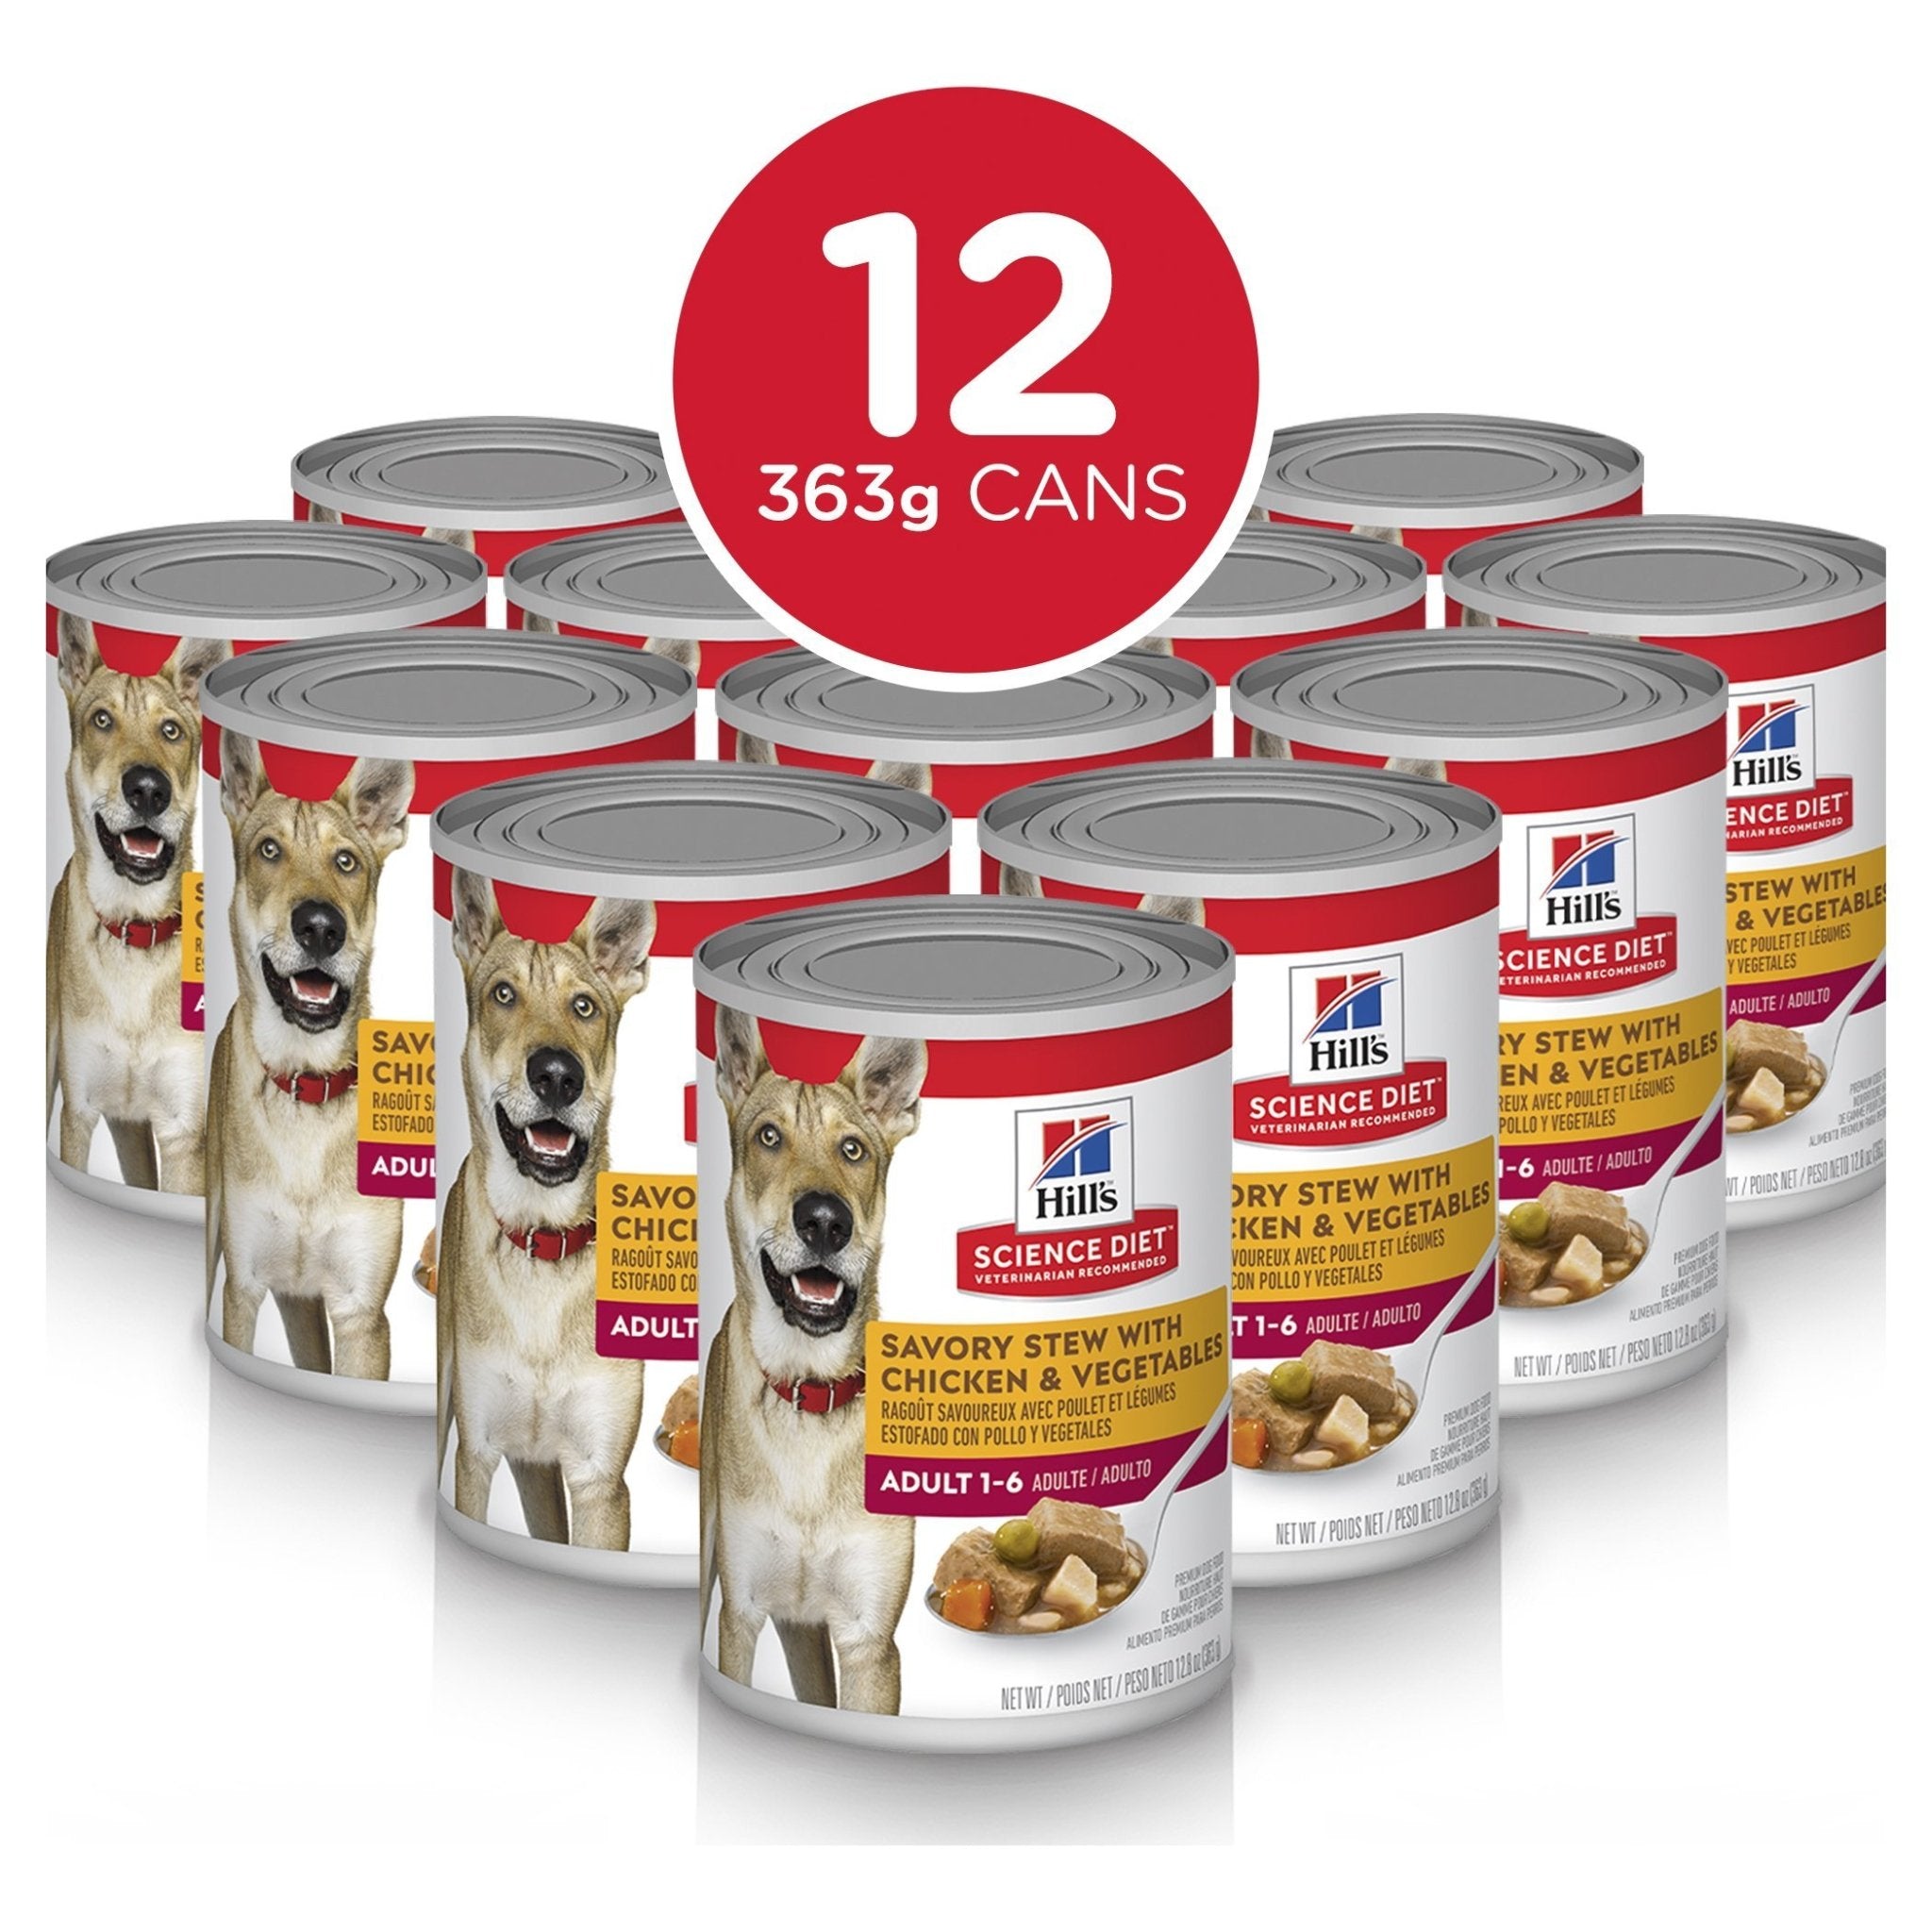 Hills Science Diet Adult Savory Stew Chicken & Vegetables Canned Dog Food, 363g, 12 Pack